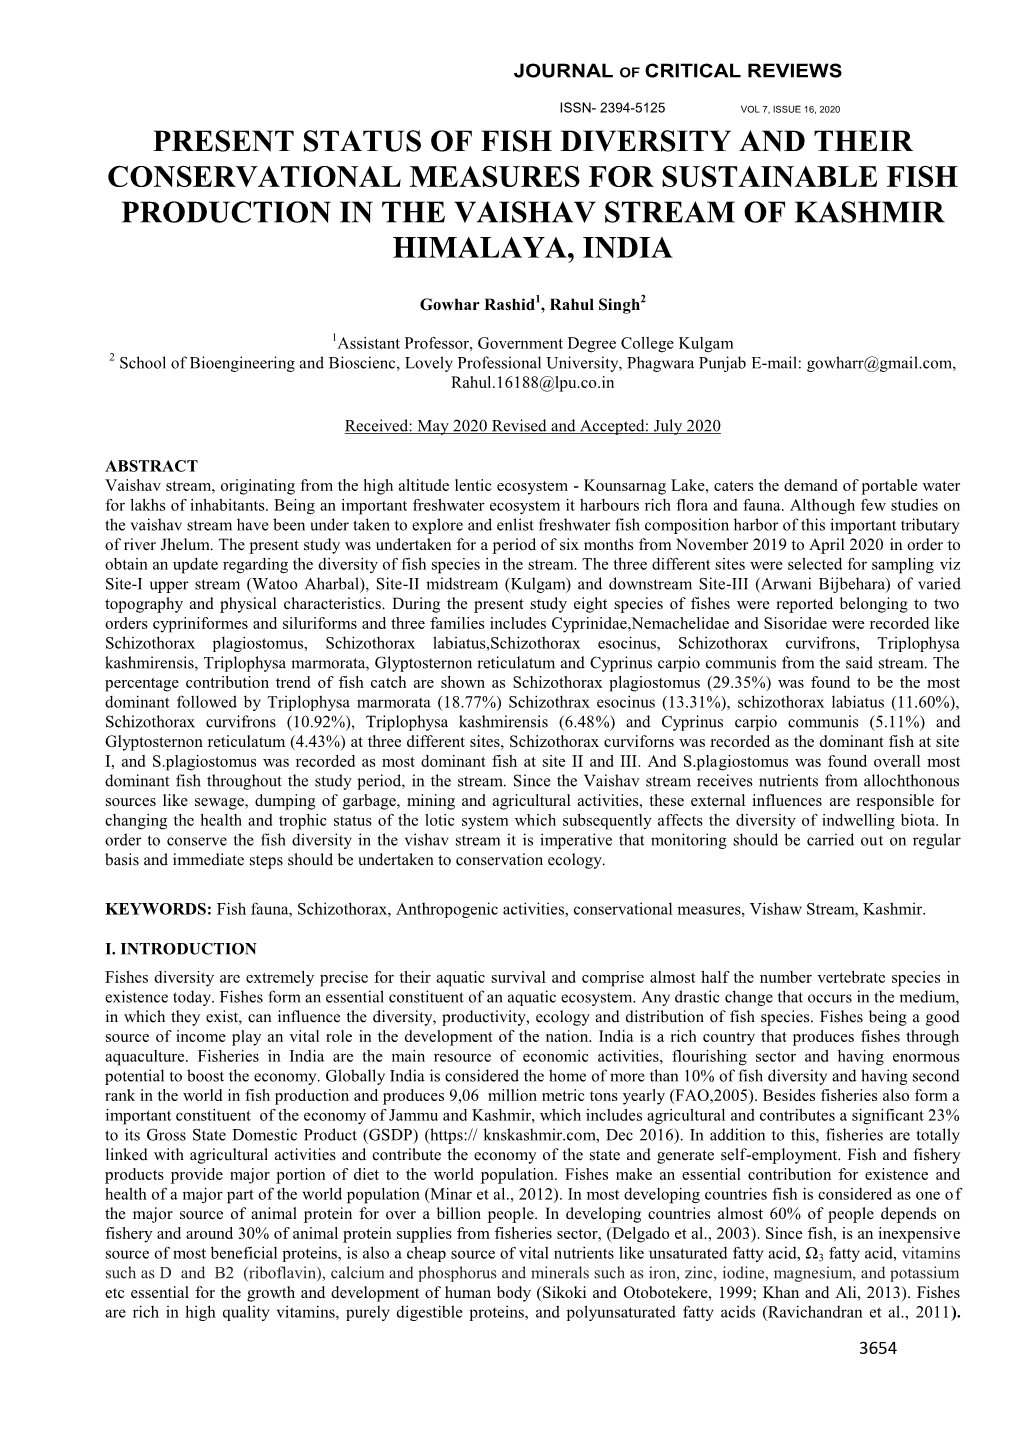 Present Status of Fish Diversity and Their Conservational Measures for Sustainable Fish Production in the Vaishav Stream of Kashmir Himalaya, India